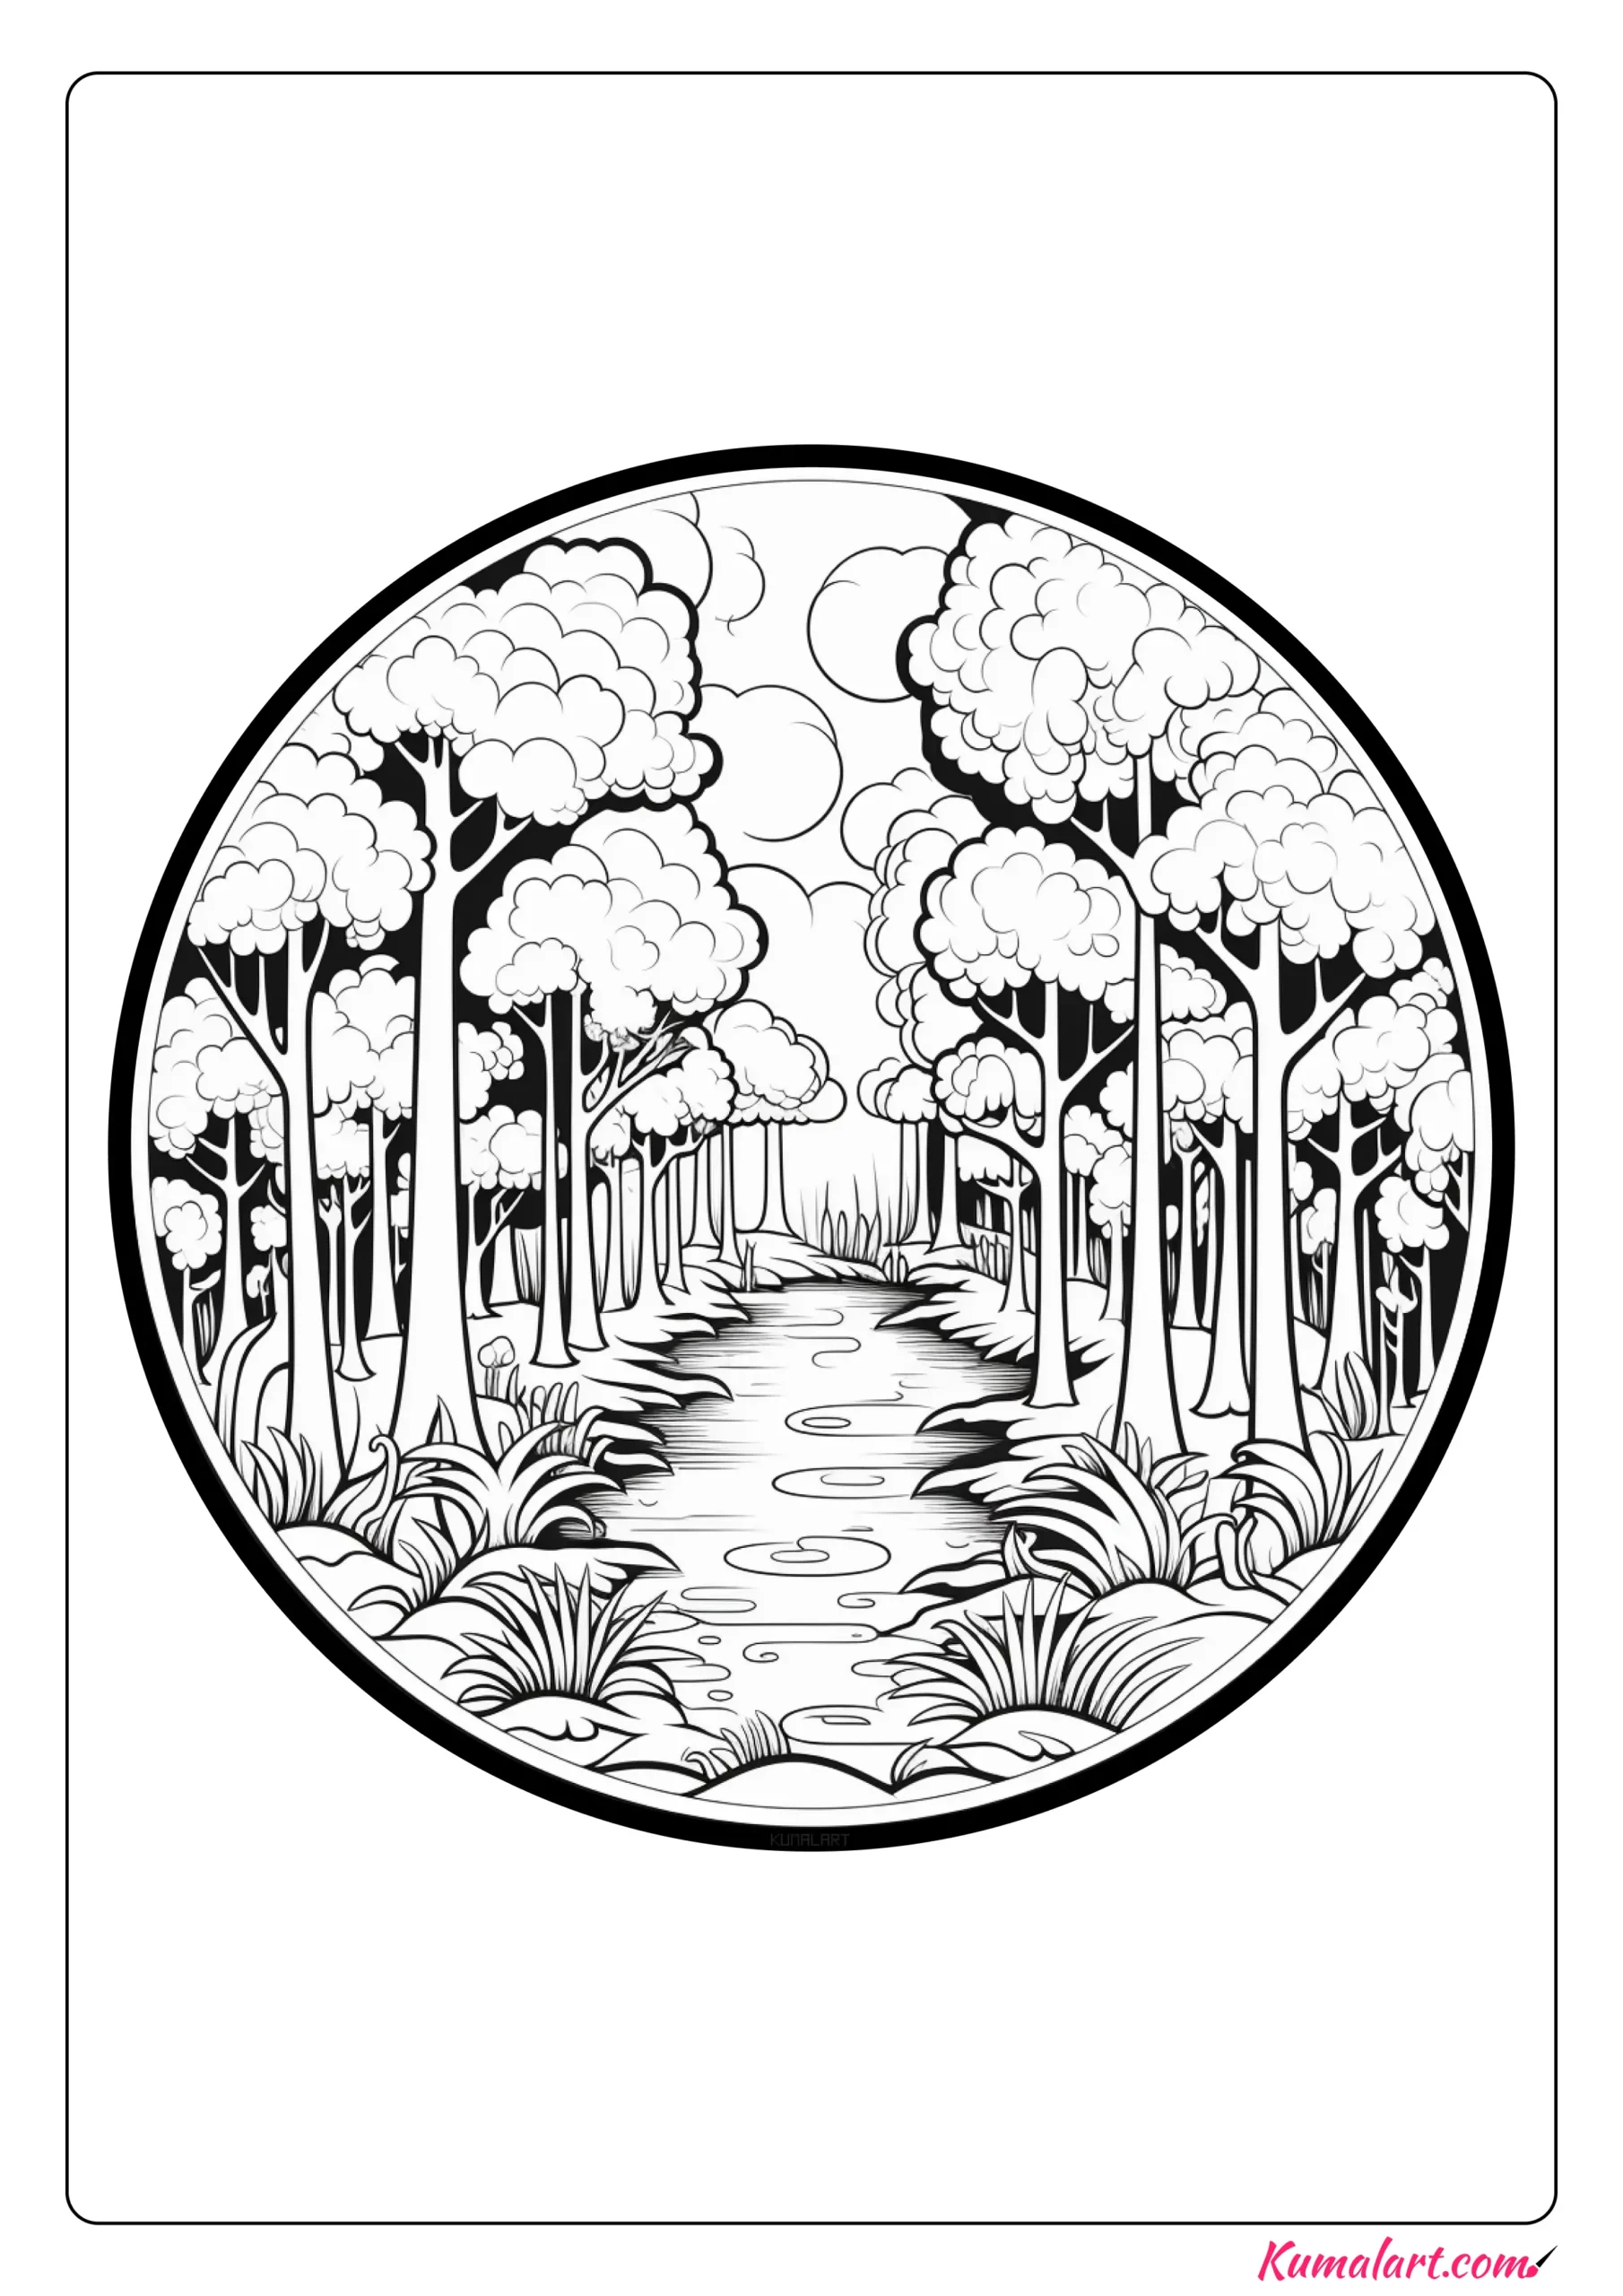 Breathtaking Rainforest Coloring Page